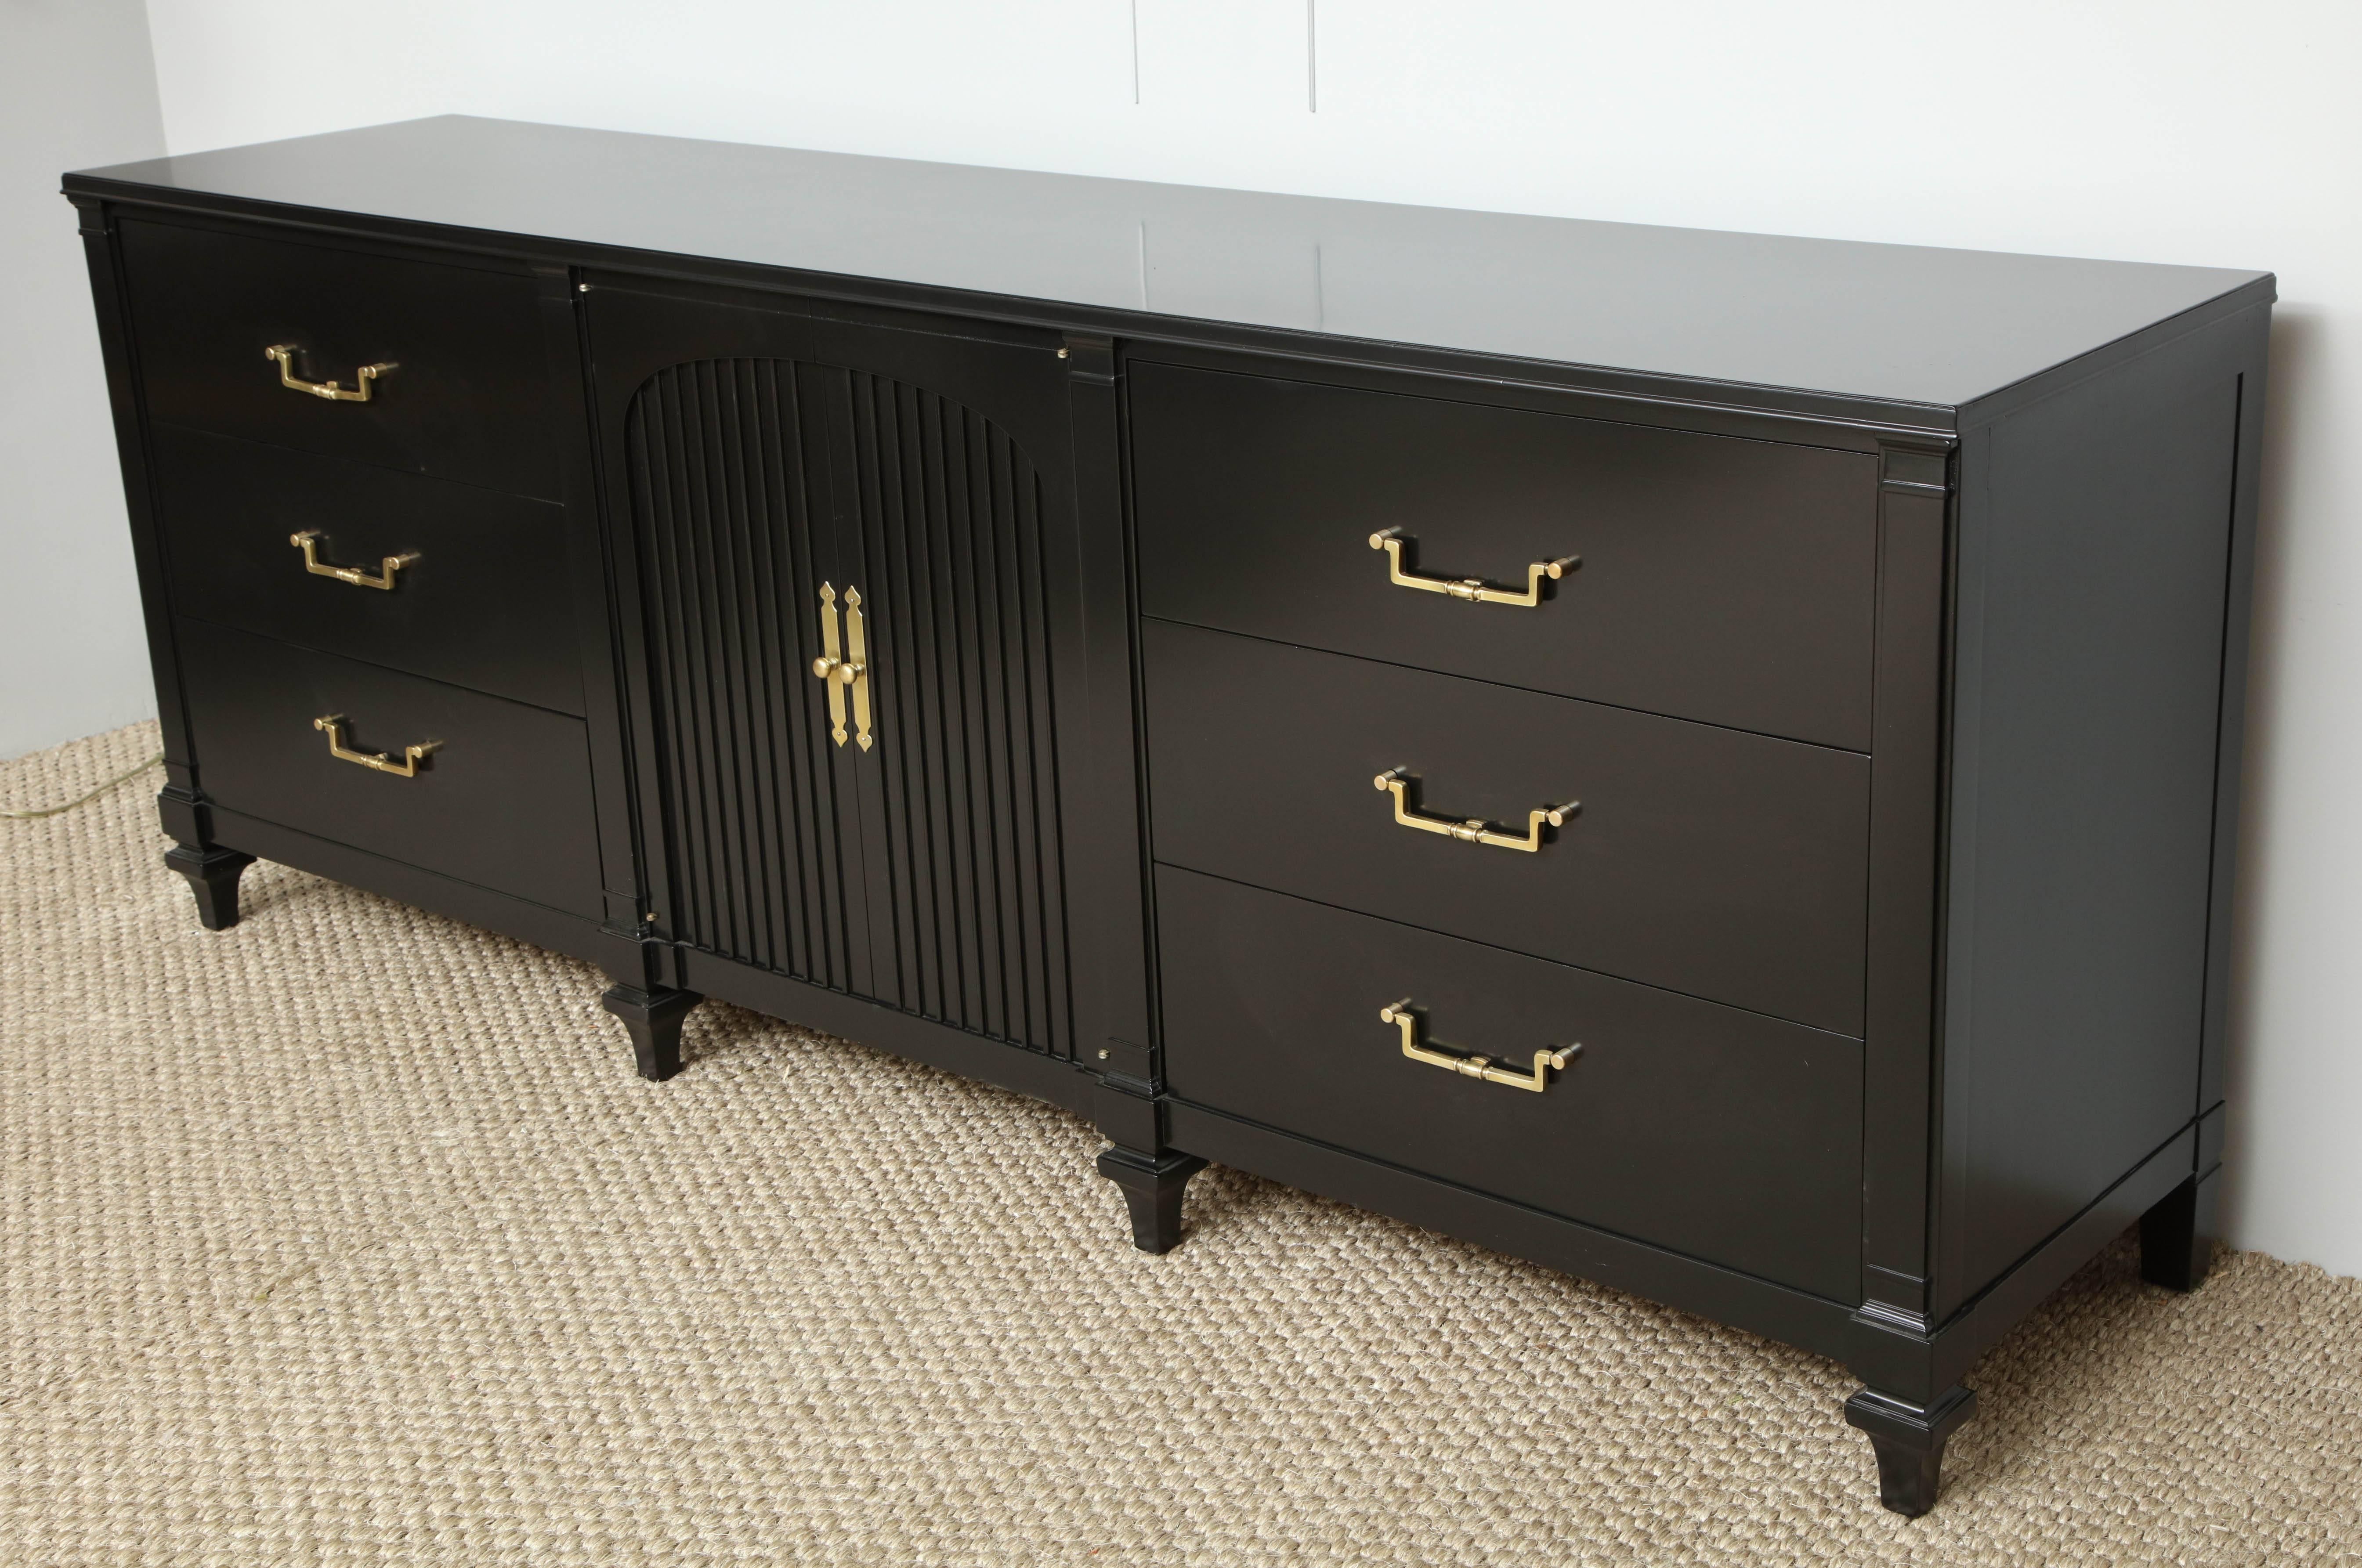 This long dresser produced (and stamped) by John Widdicomb has both form and function. Lacquered in black satin, this great looking piece features two paneled center doors, opening to expose three pull-out drawers and three large drawers on either